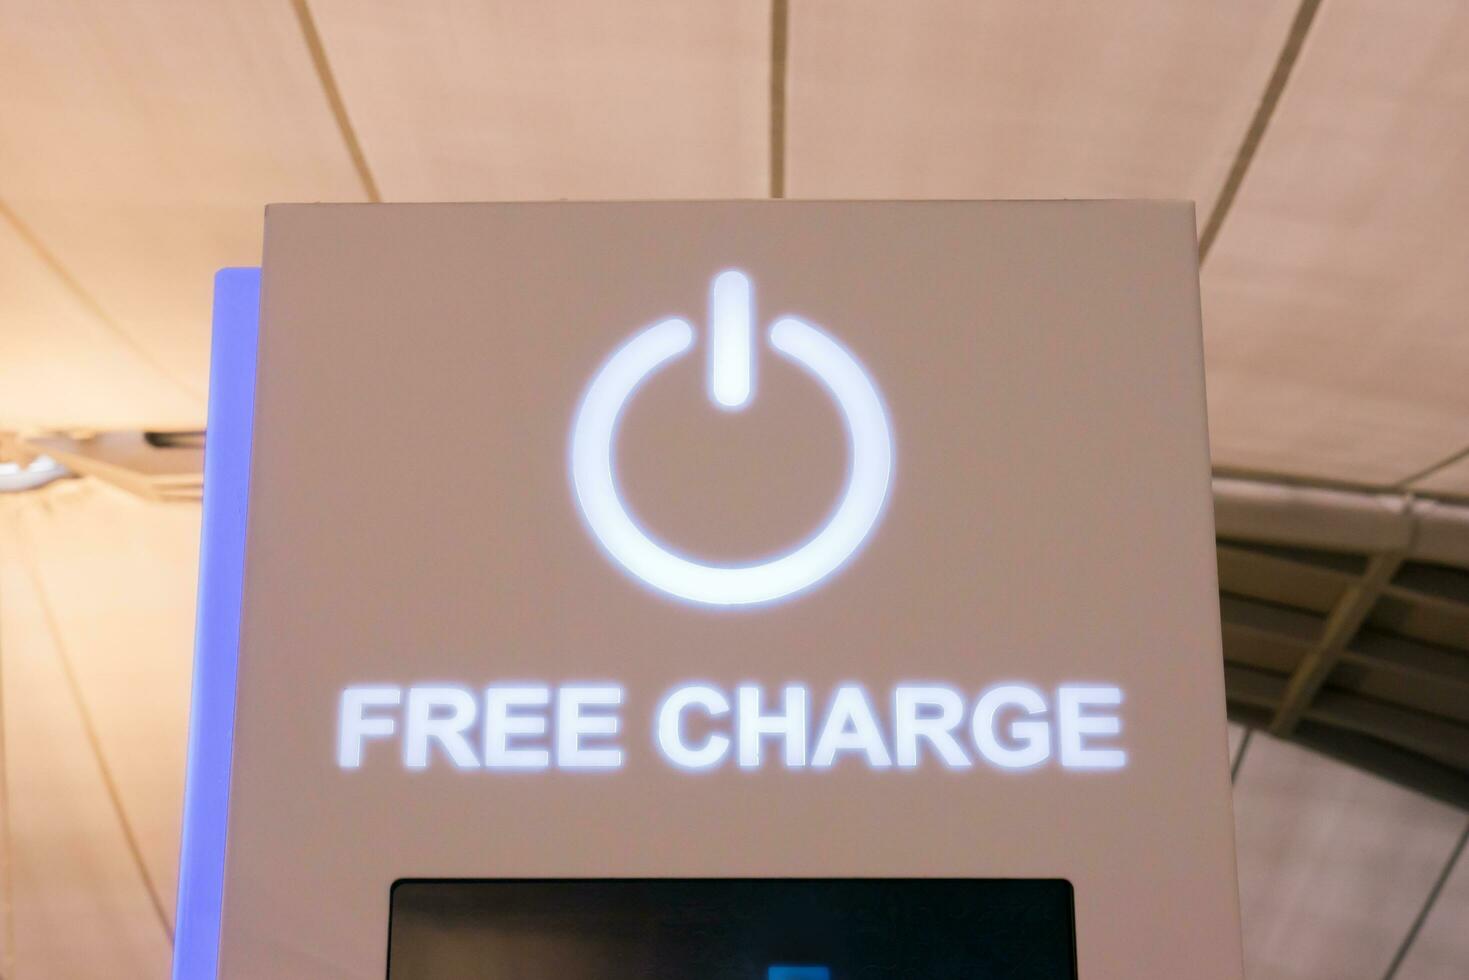 Free charging station in airport photo